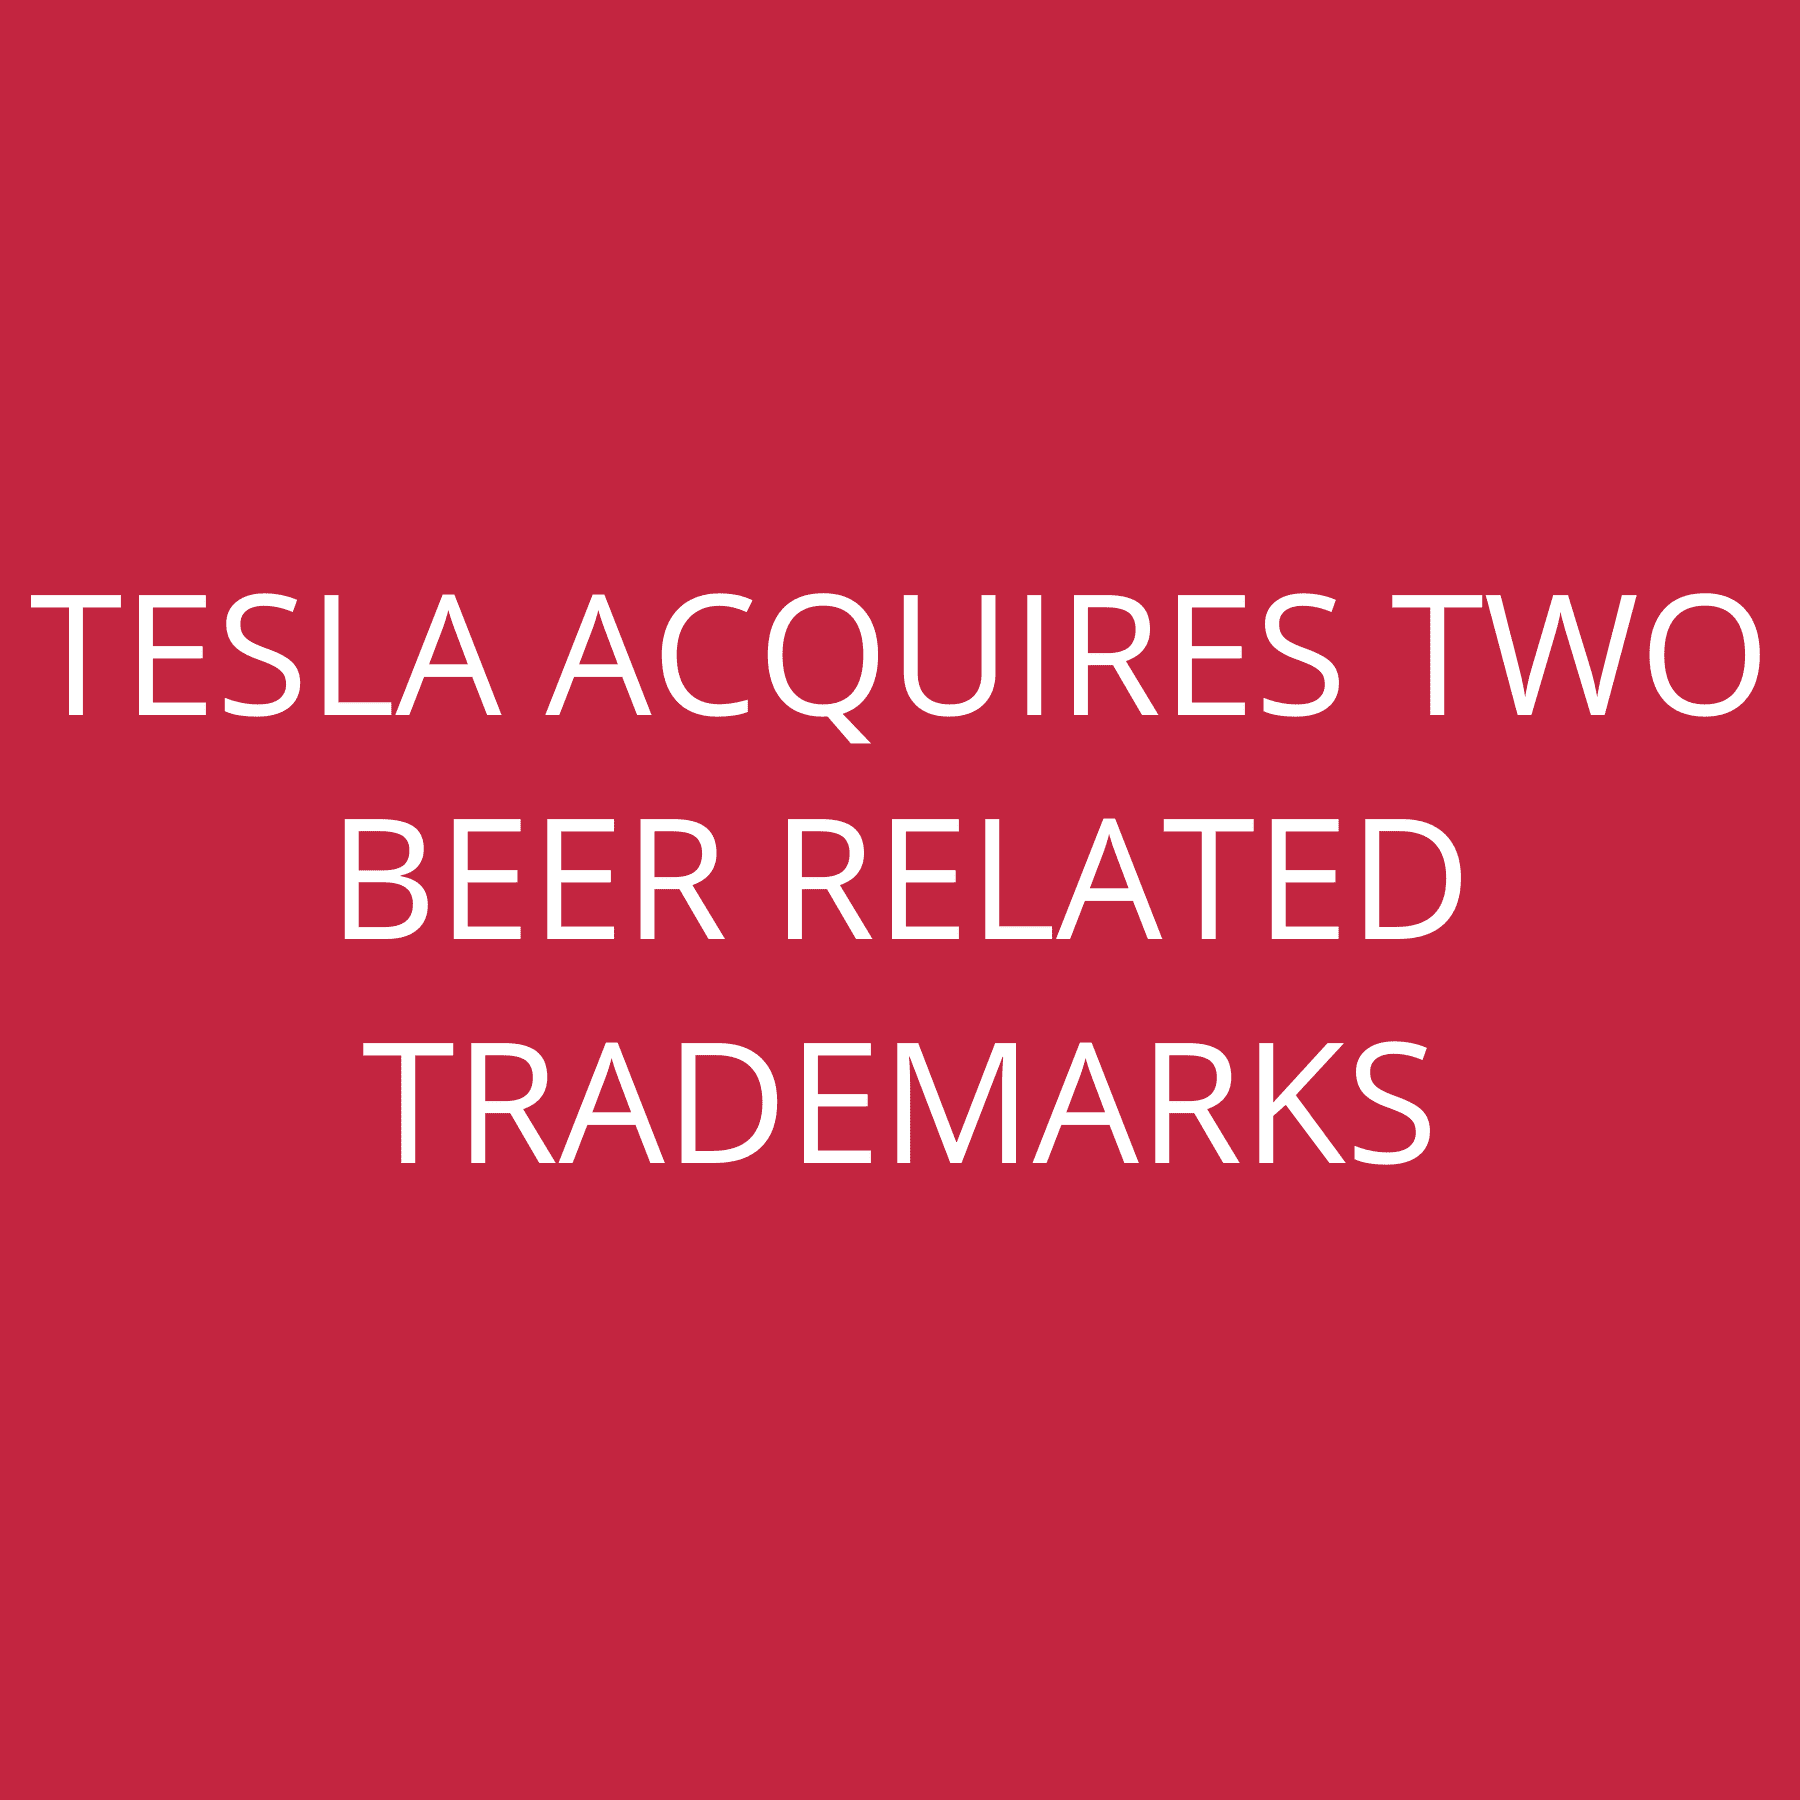 Tesla acquires two beer related trademarks